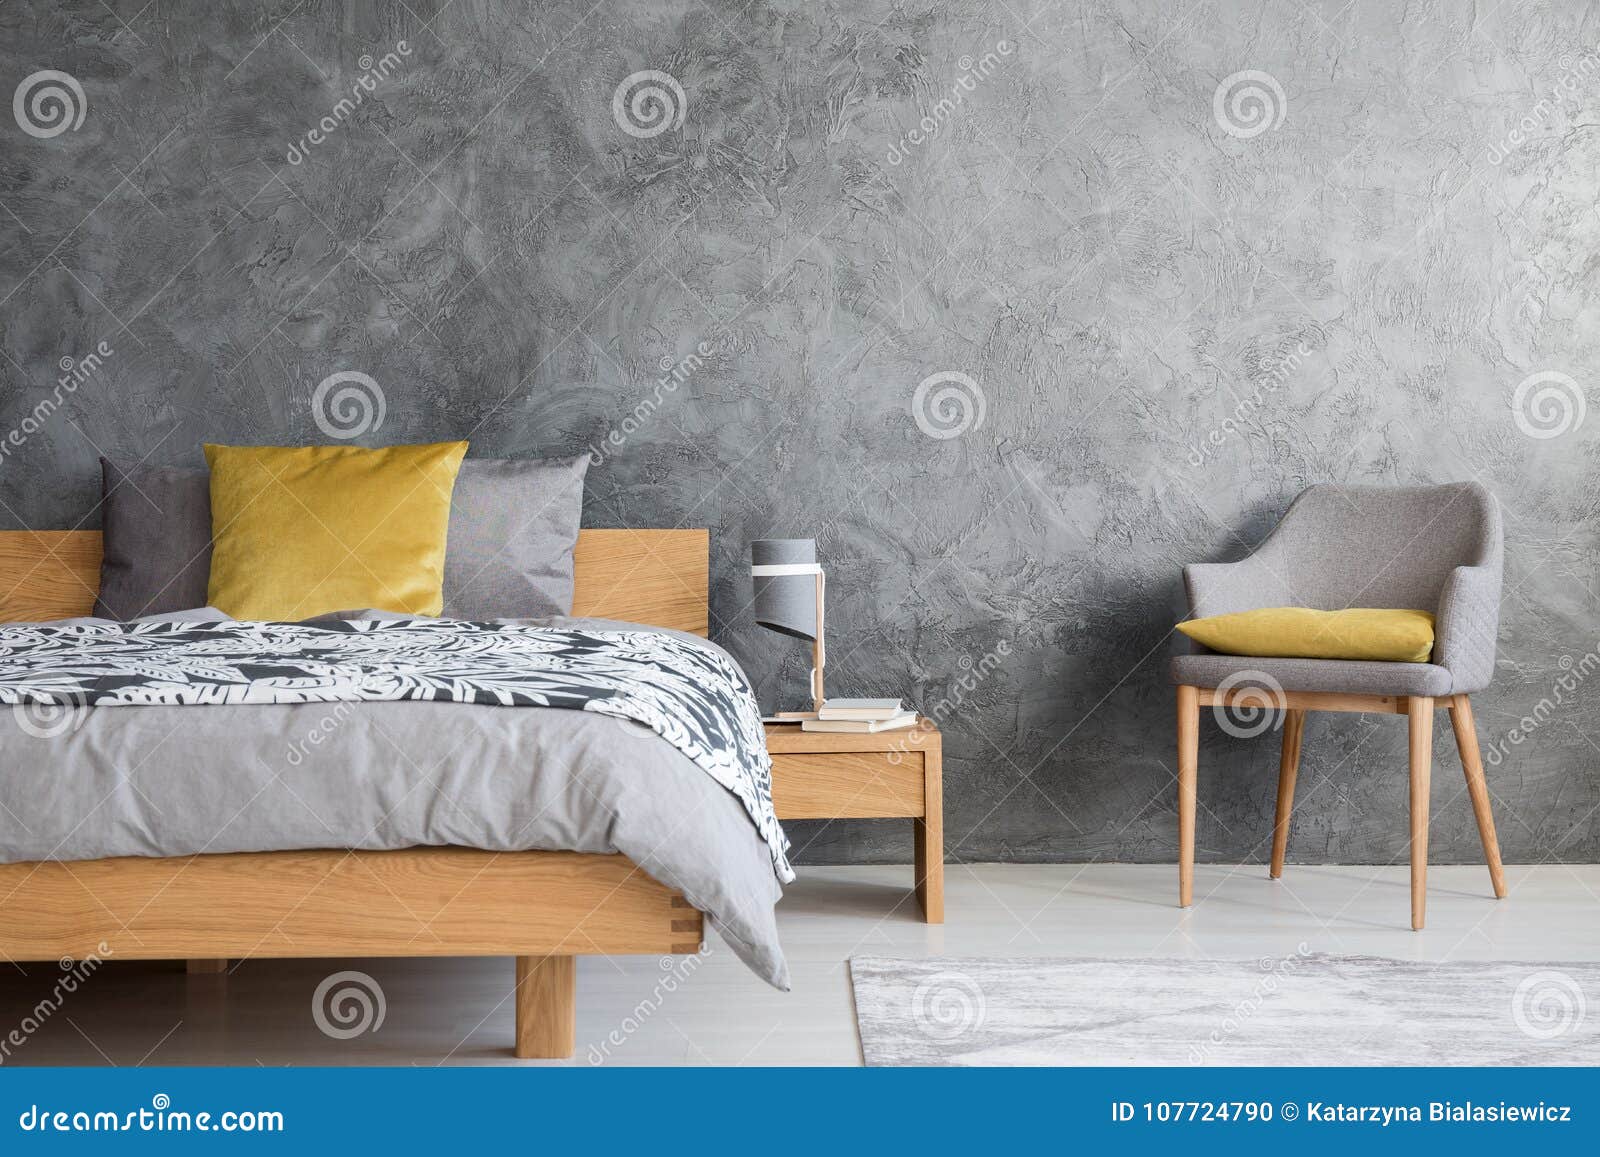 dark bedroom with grey chair stock photo  image of